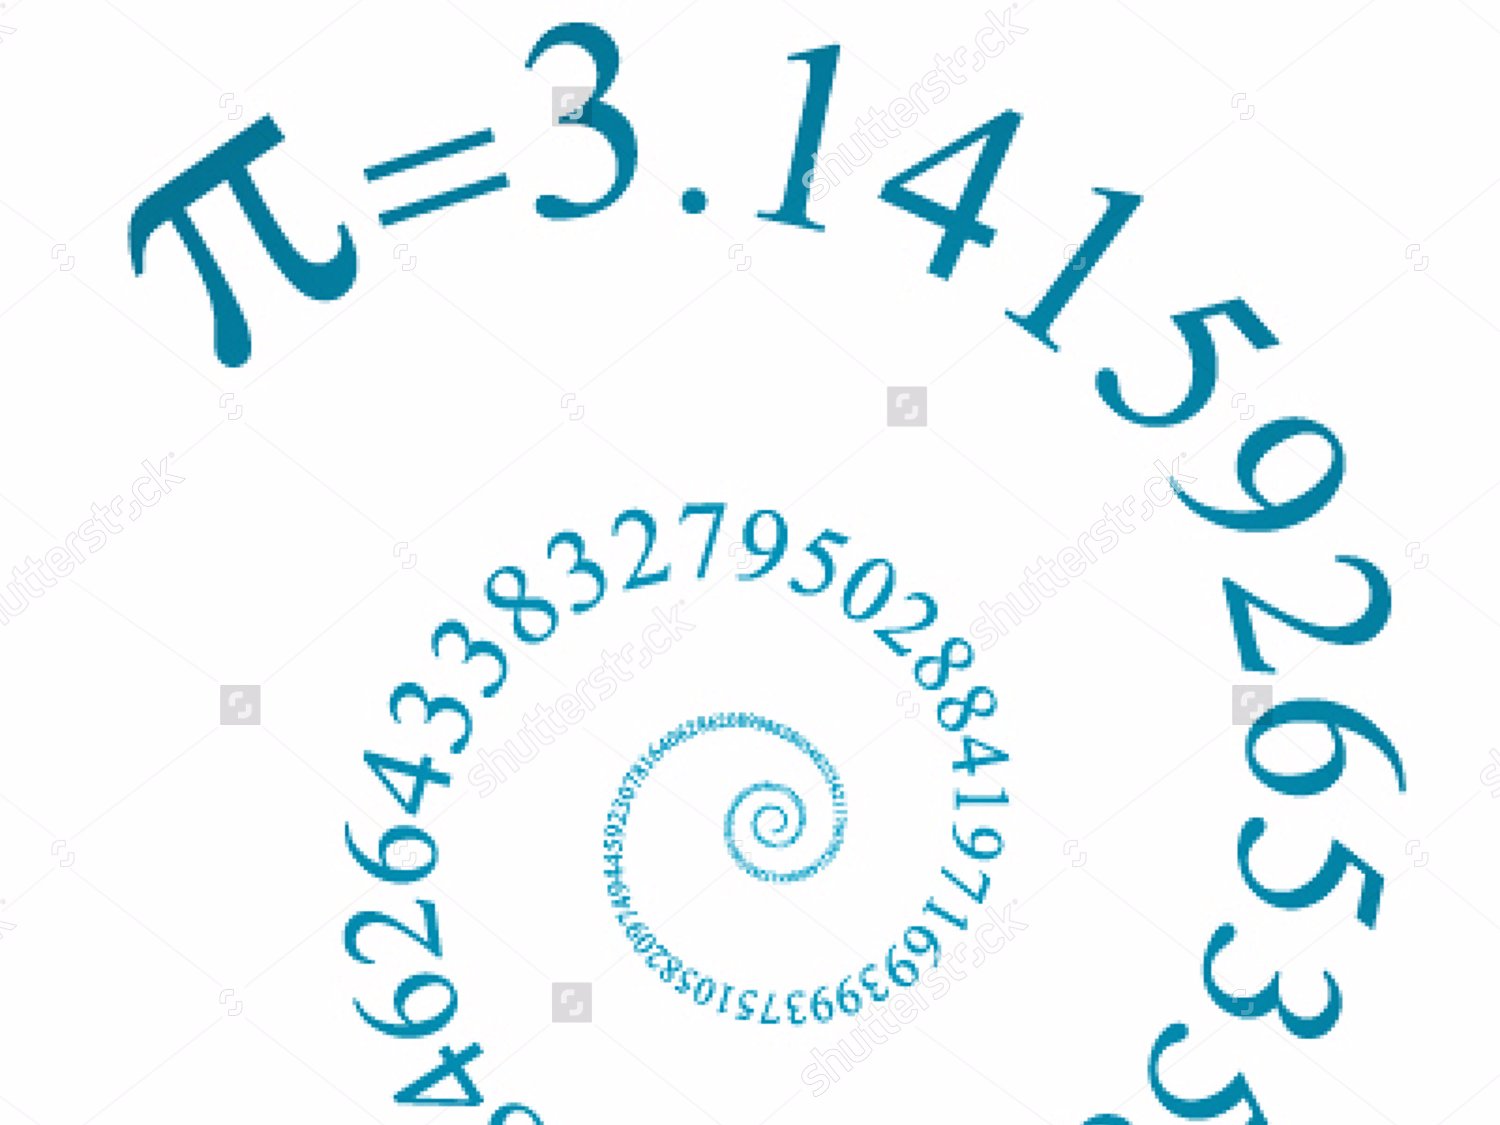 who was the first to calculate pi